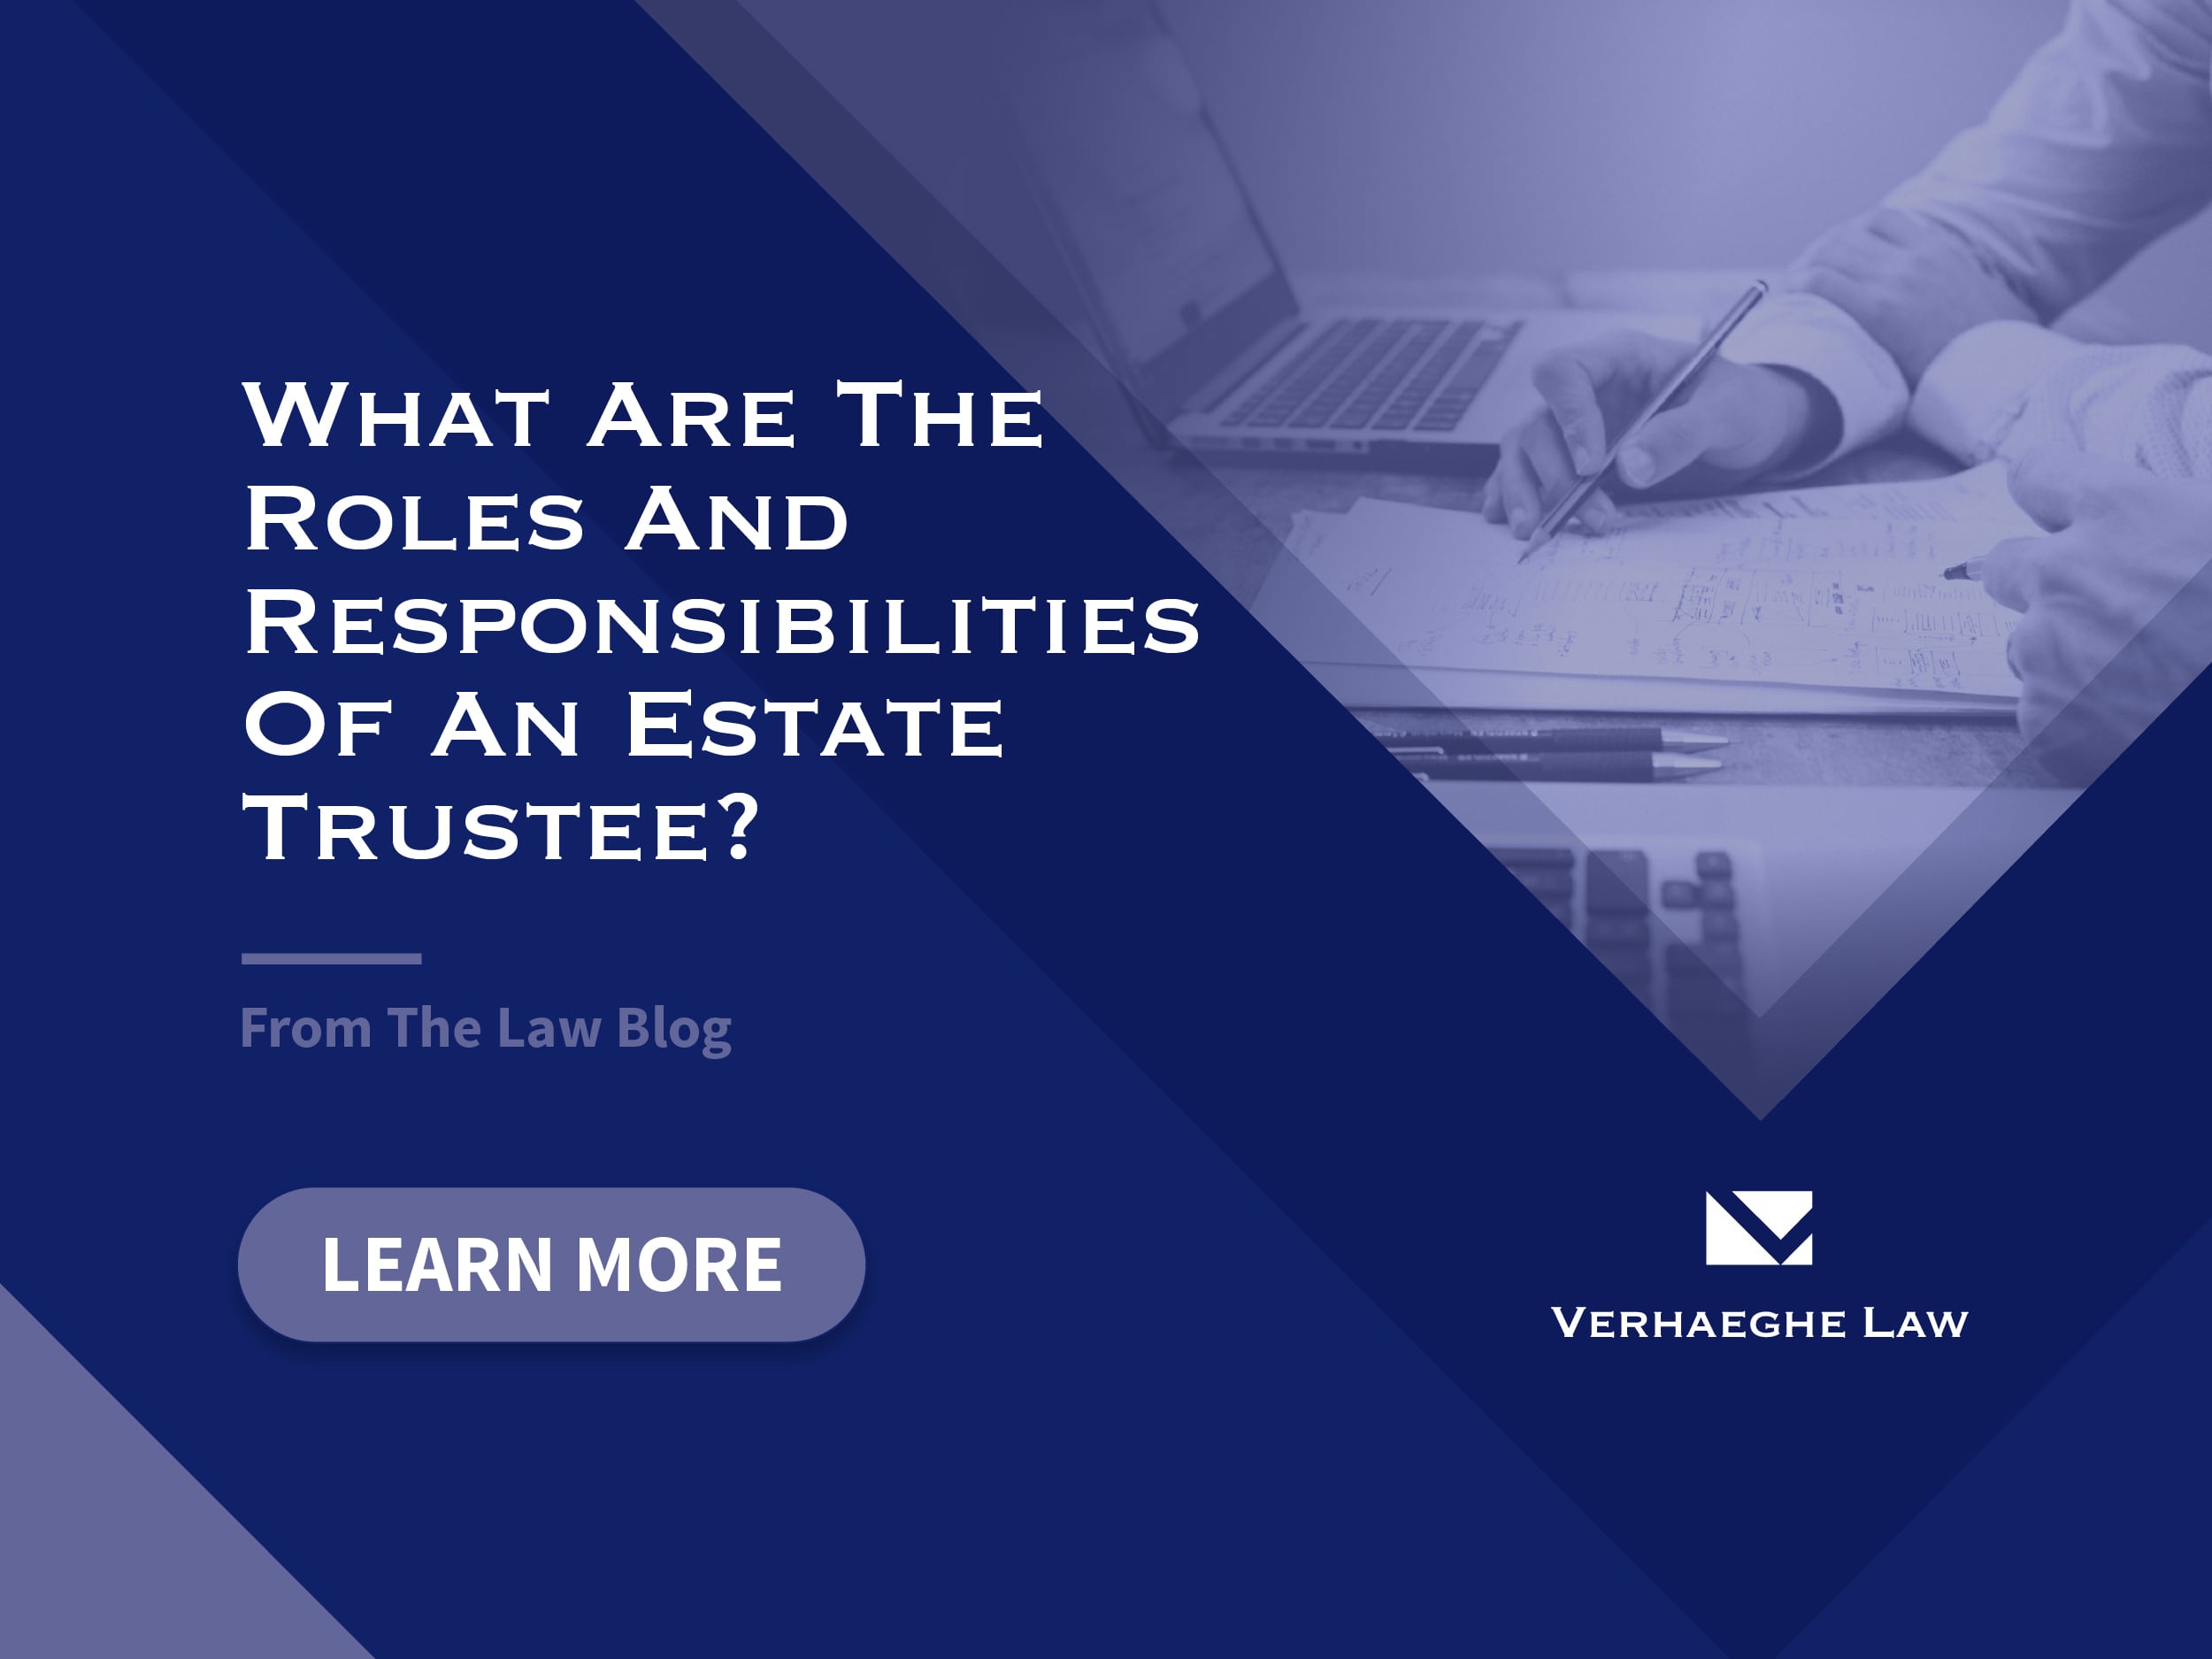 What Are The Roles And Responsibilities Of An Estate Trustee?